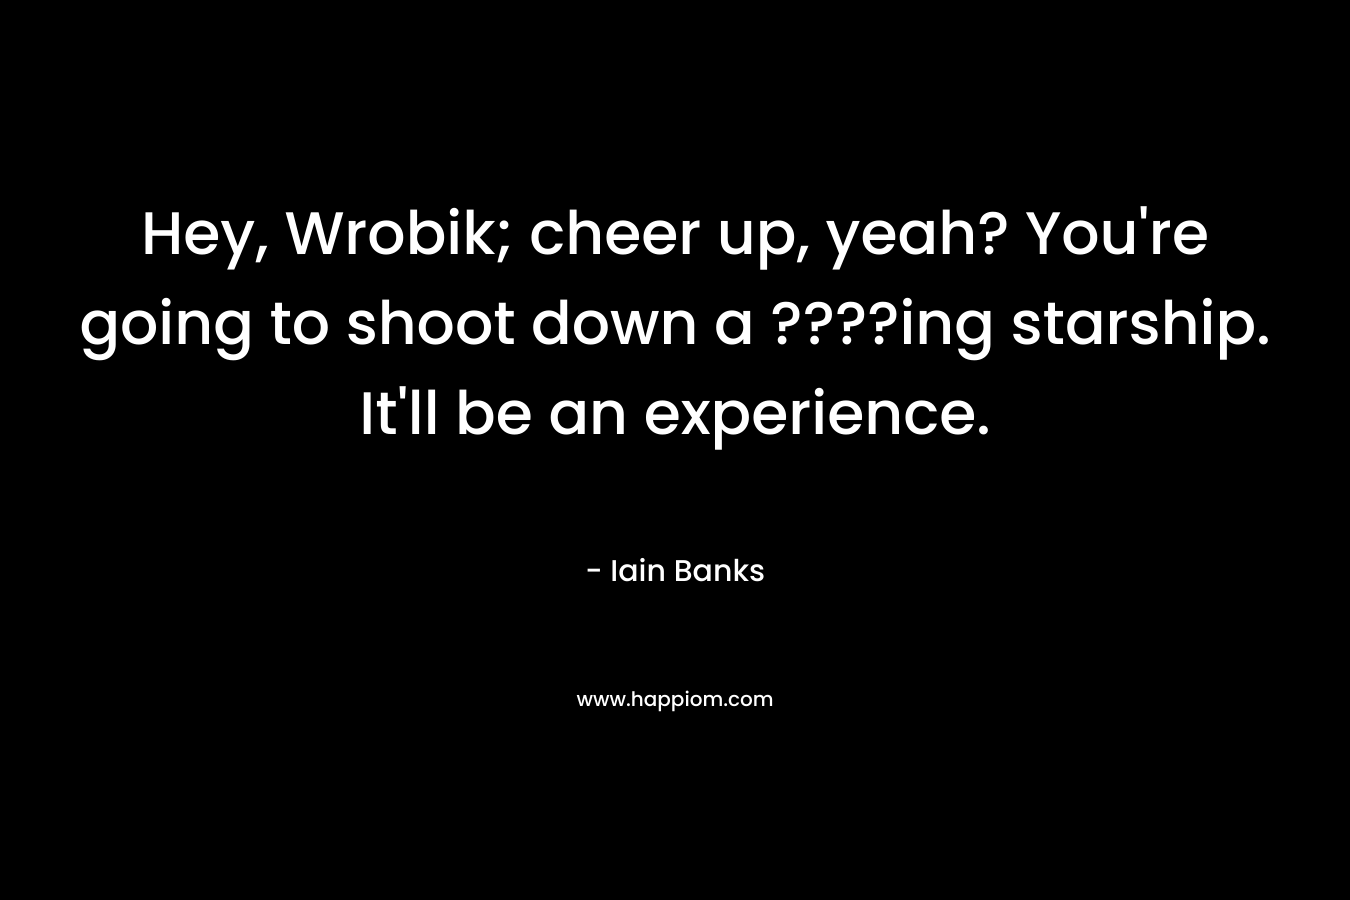 Hey, Wrobik; cheer up, yeah? You’re going to shoot down a ????ing starship. It’ll be an experience. – Iain Banks